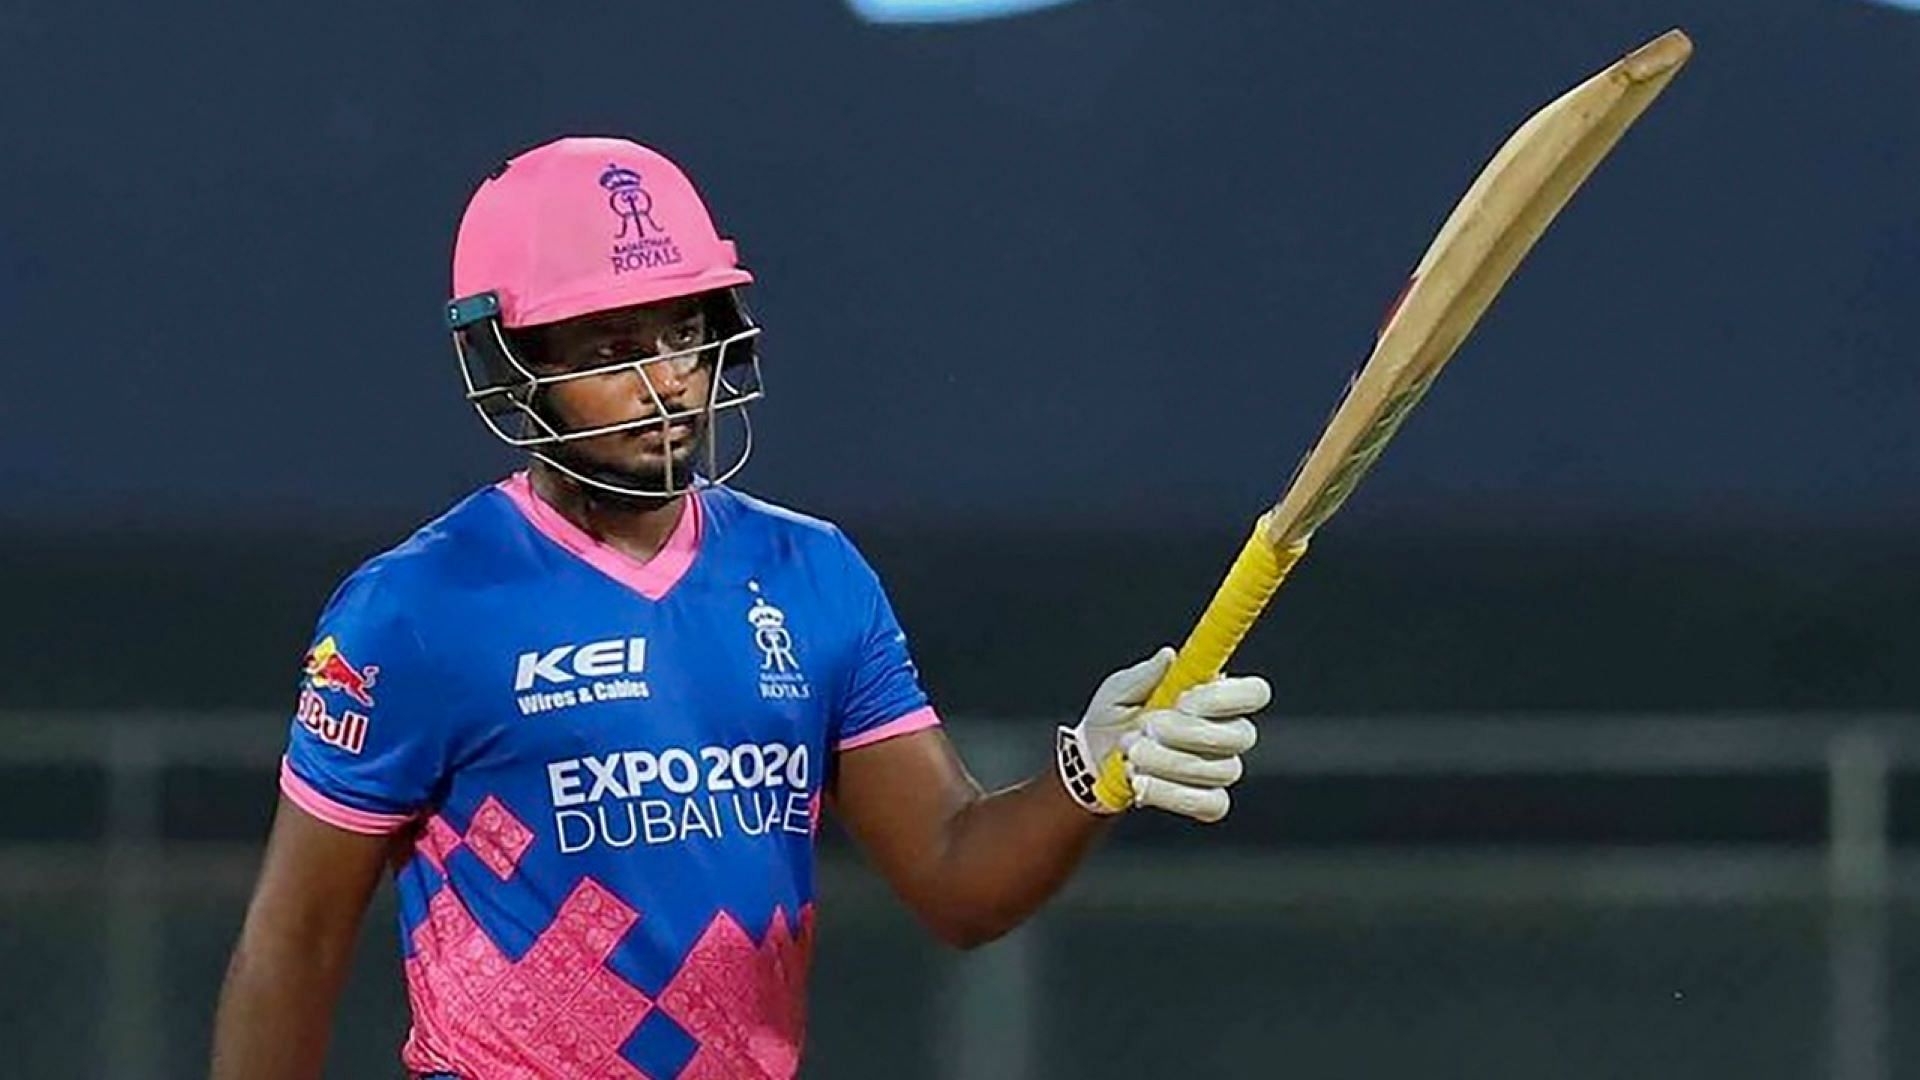 Sanju Samson will hope for an impressive tournament with the bat to reclaim his place in the Indian team.